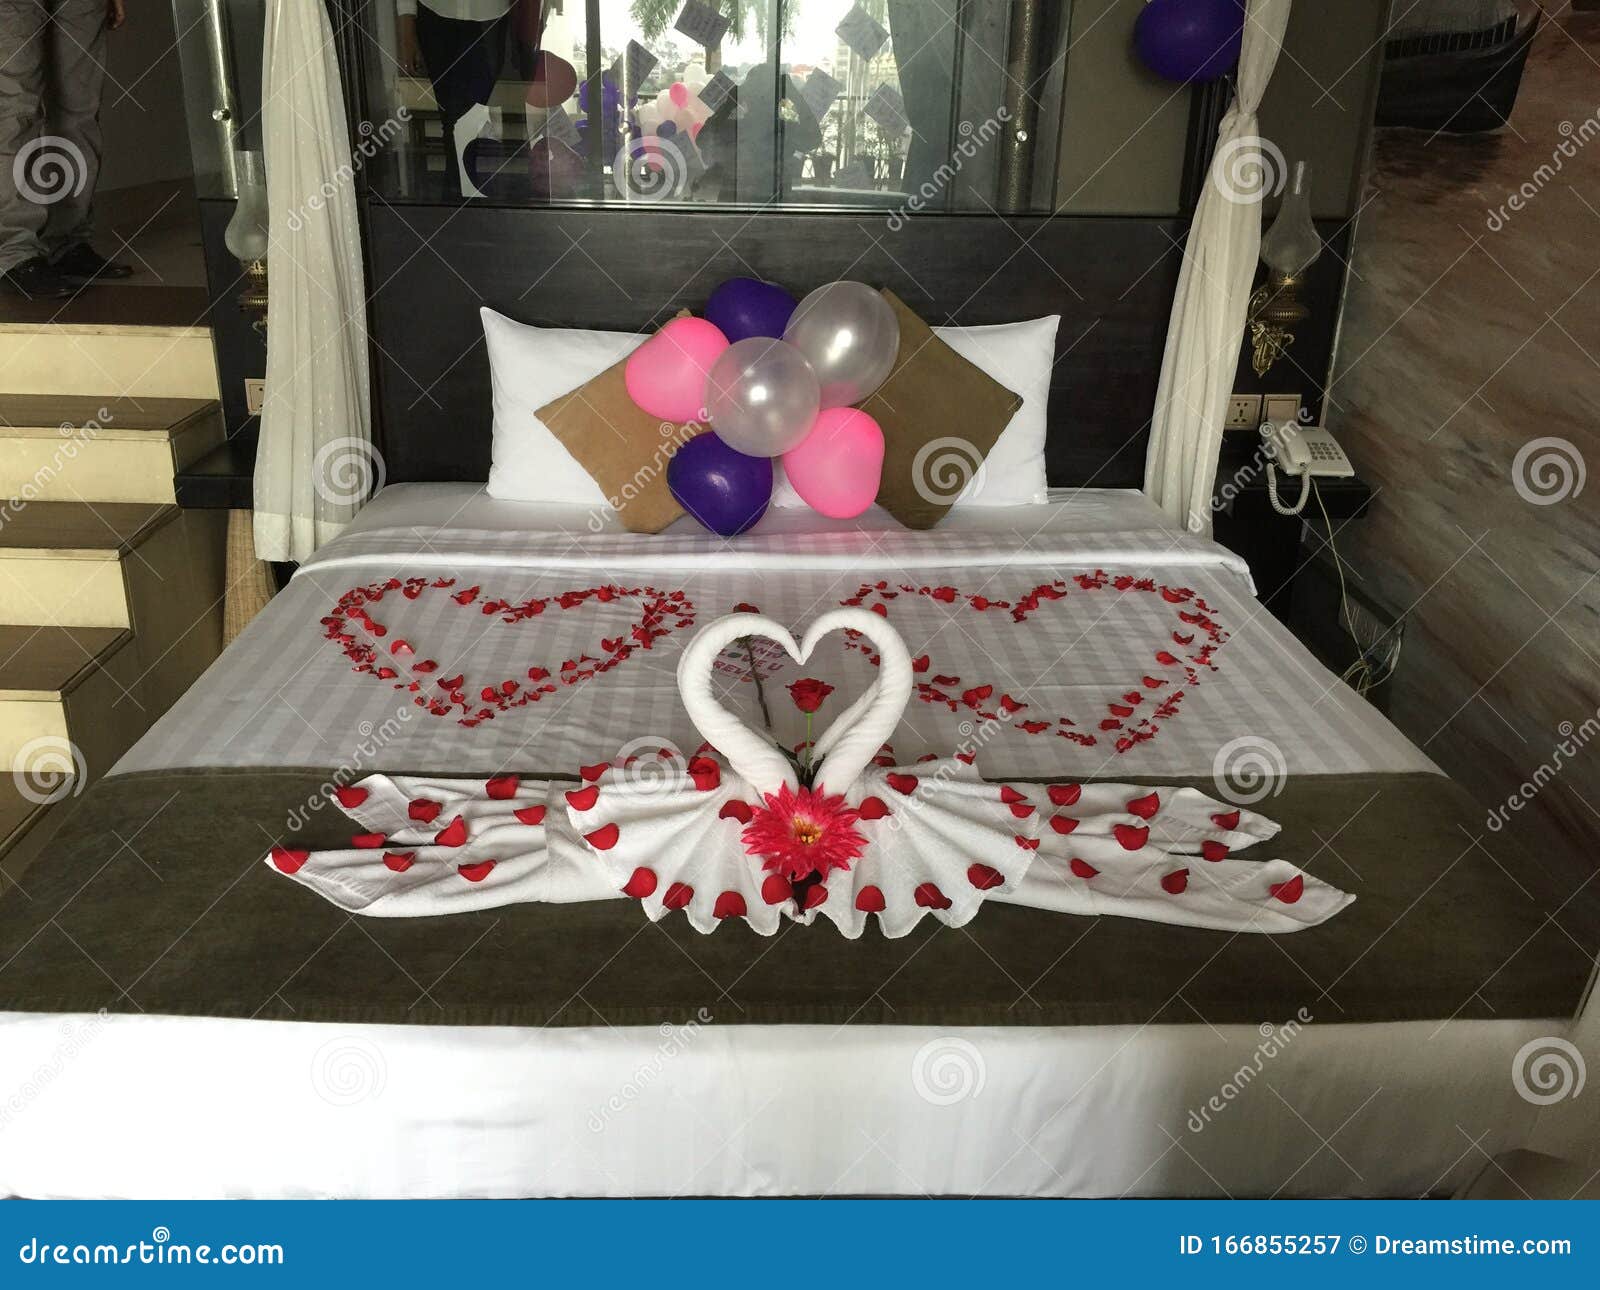 Special Honeymoon Room Decoration, Hotel Room Pic Stock Image ...